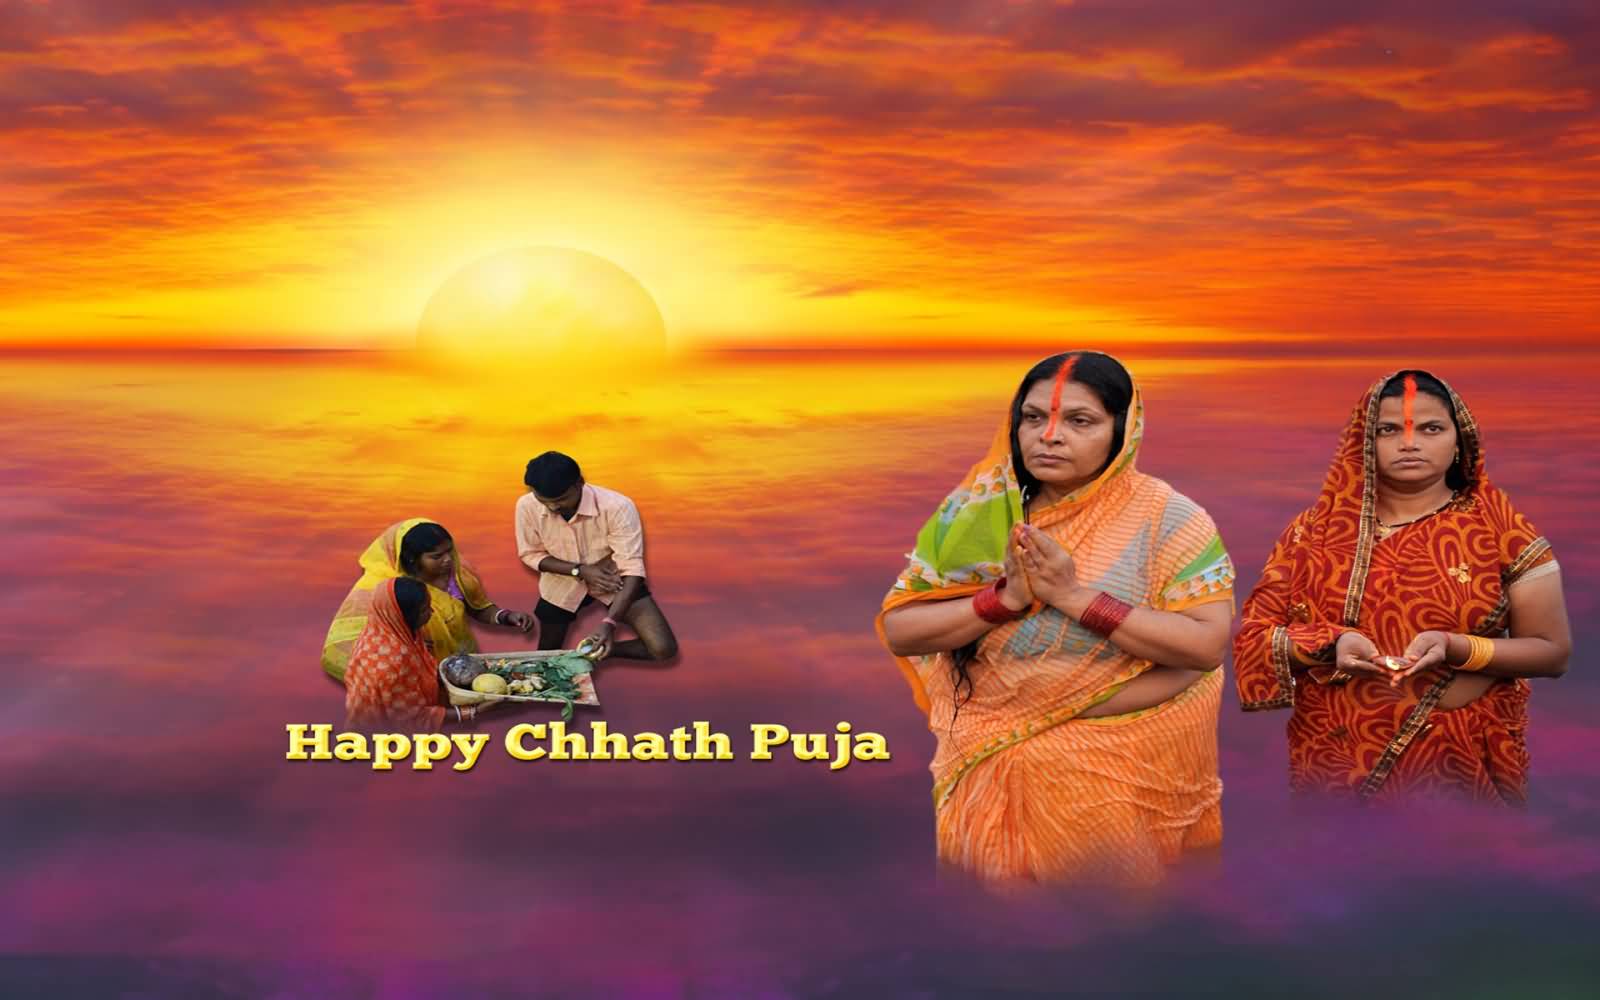 Happy Chhath Puja 2016 Greetings Picture - New Chhath , HD Wallpaper & Backgrounds